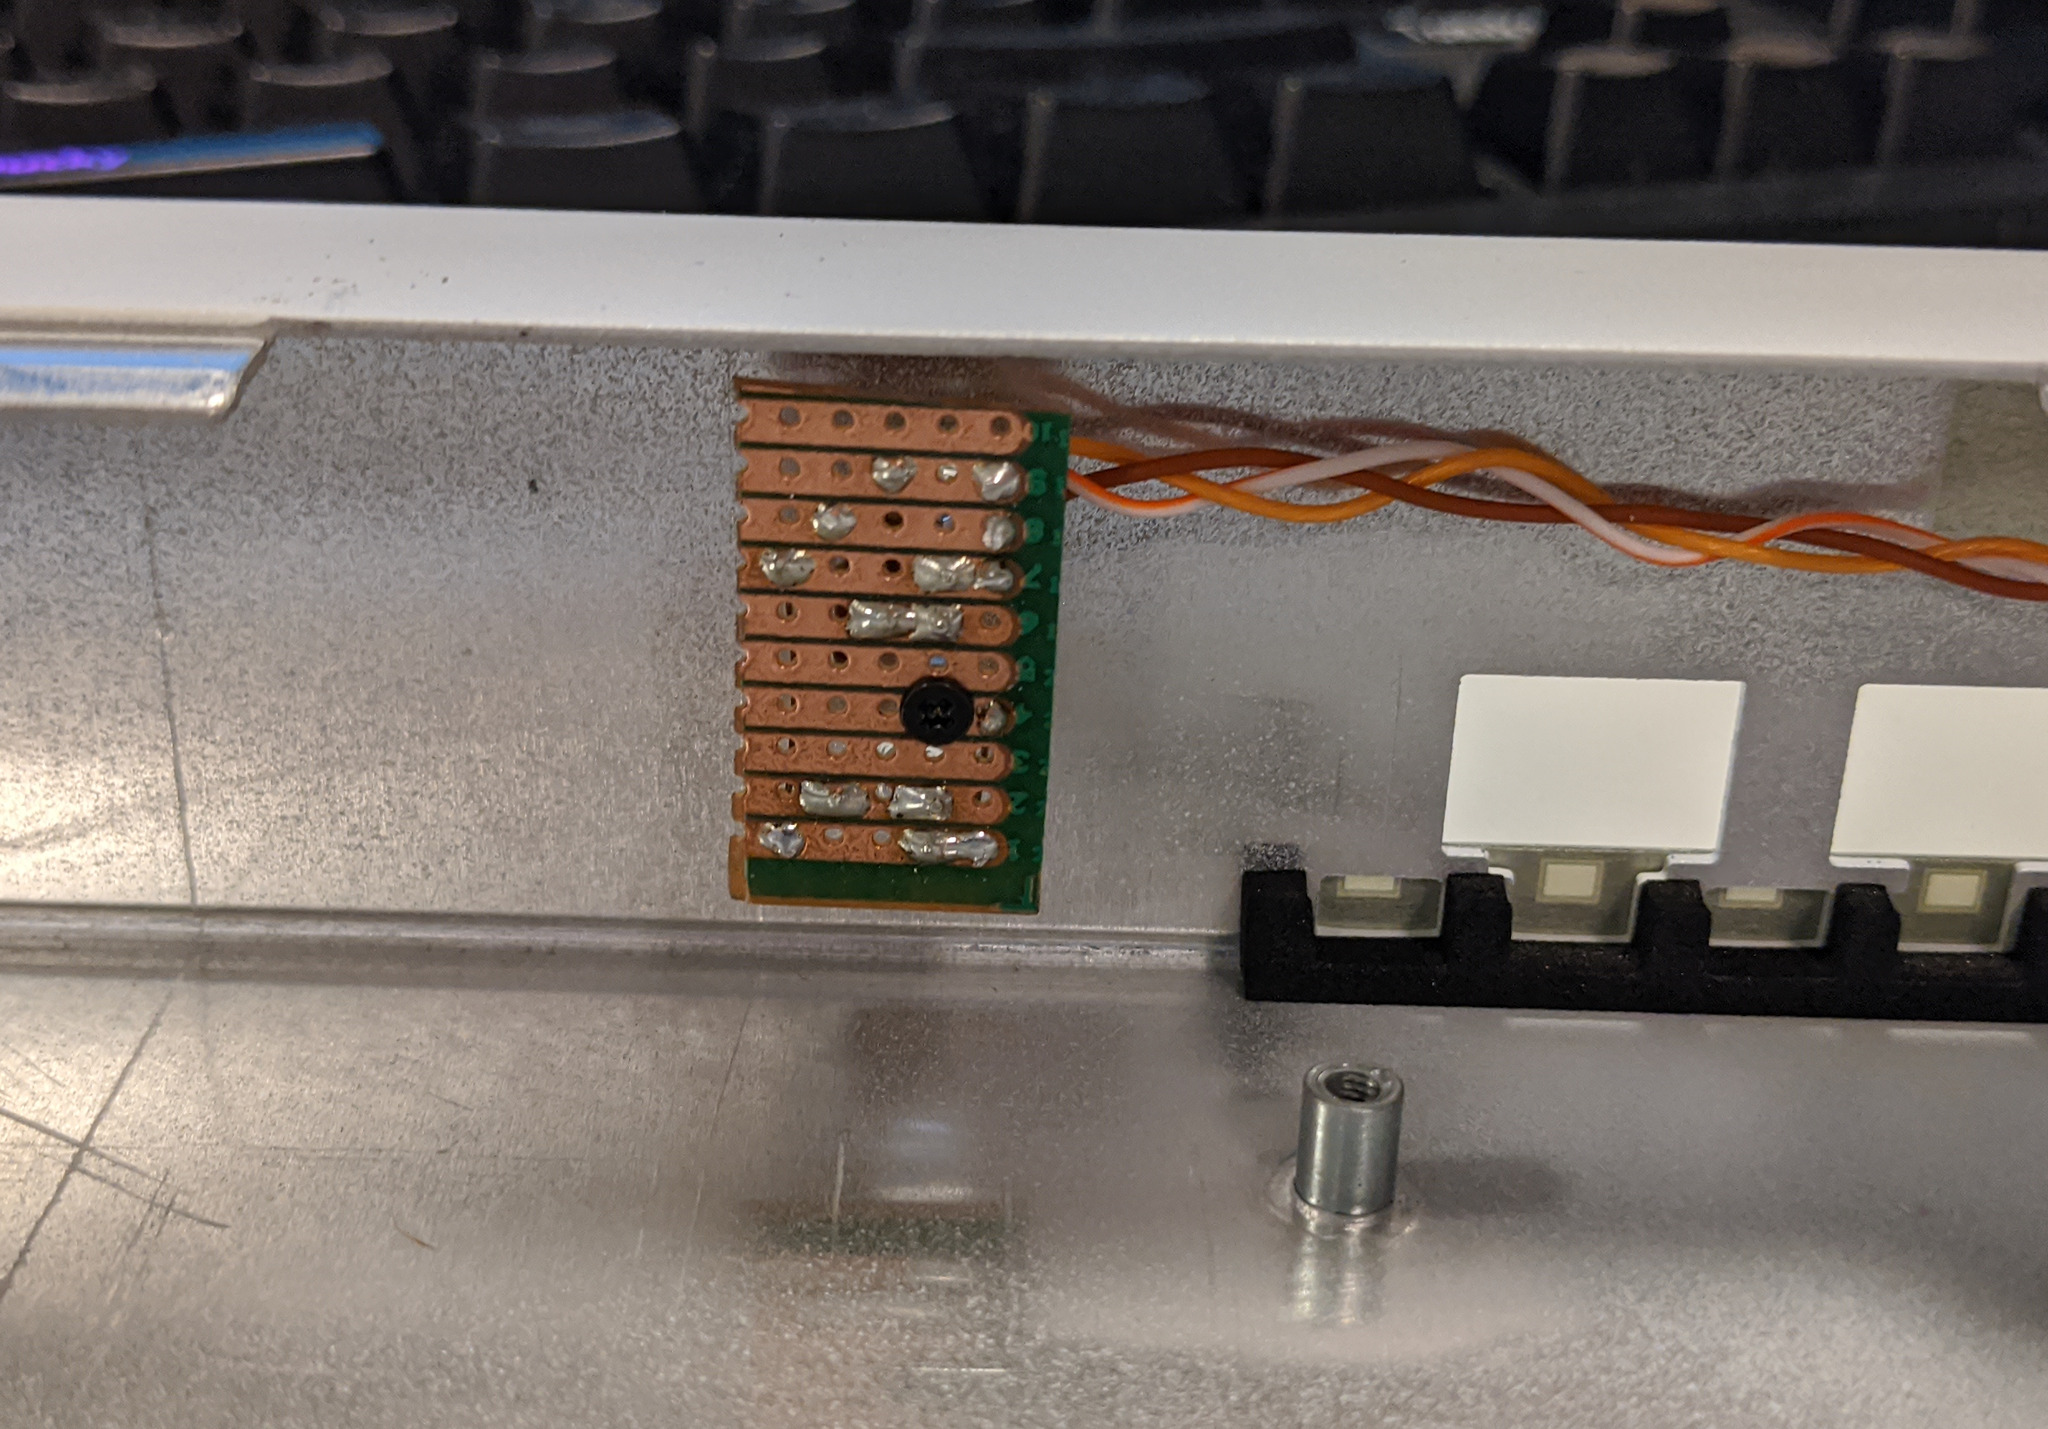 LED board mounted inside the switch